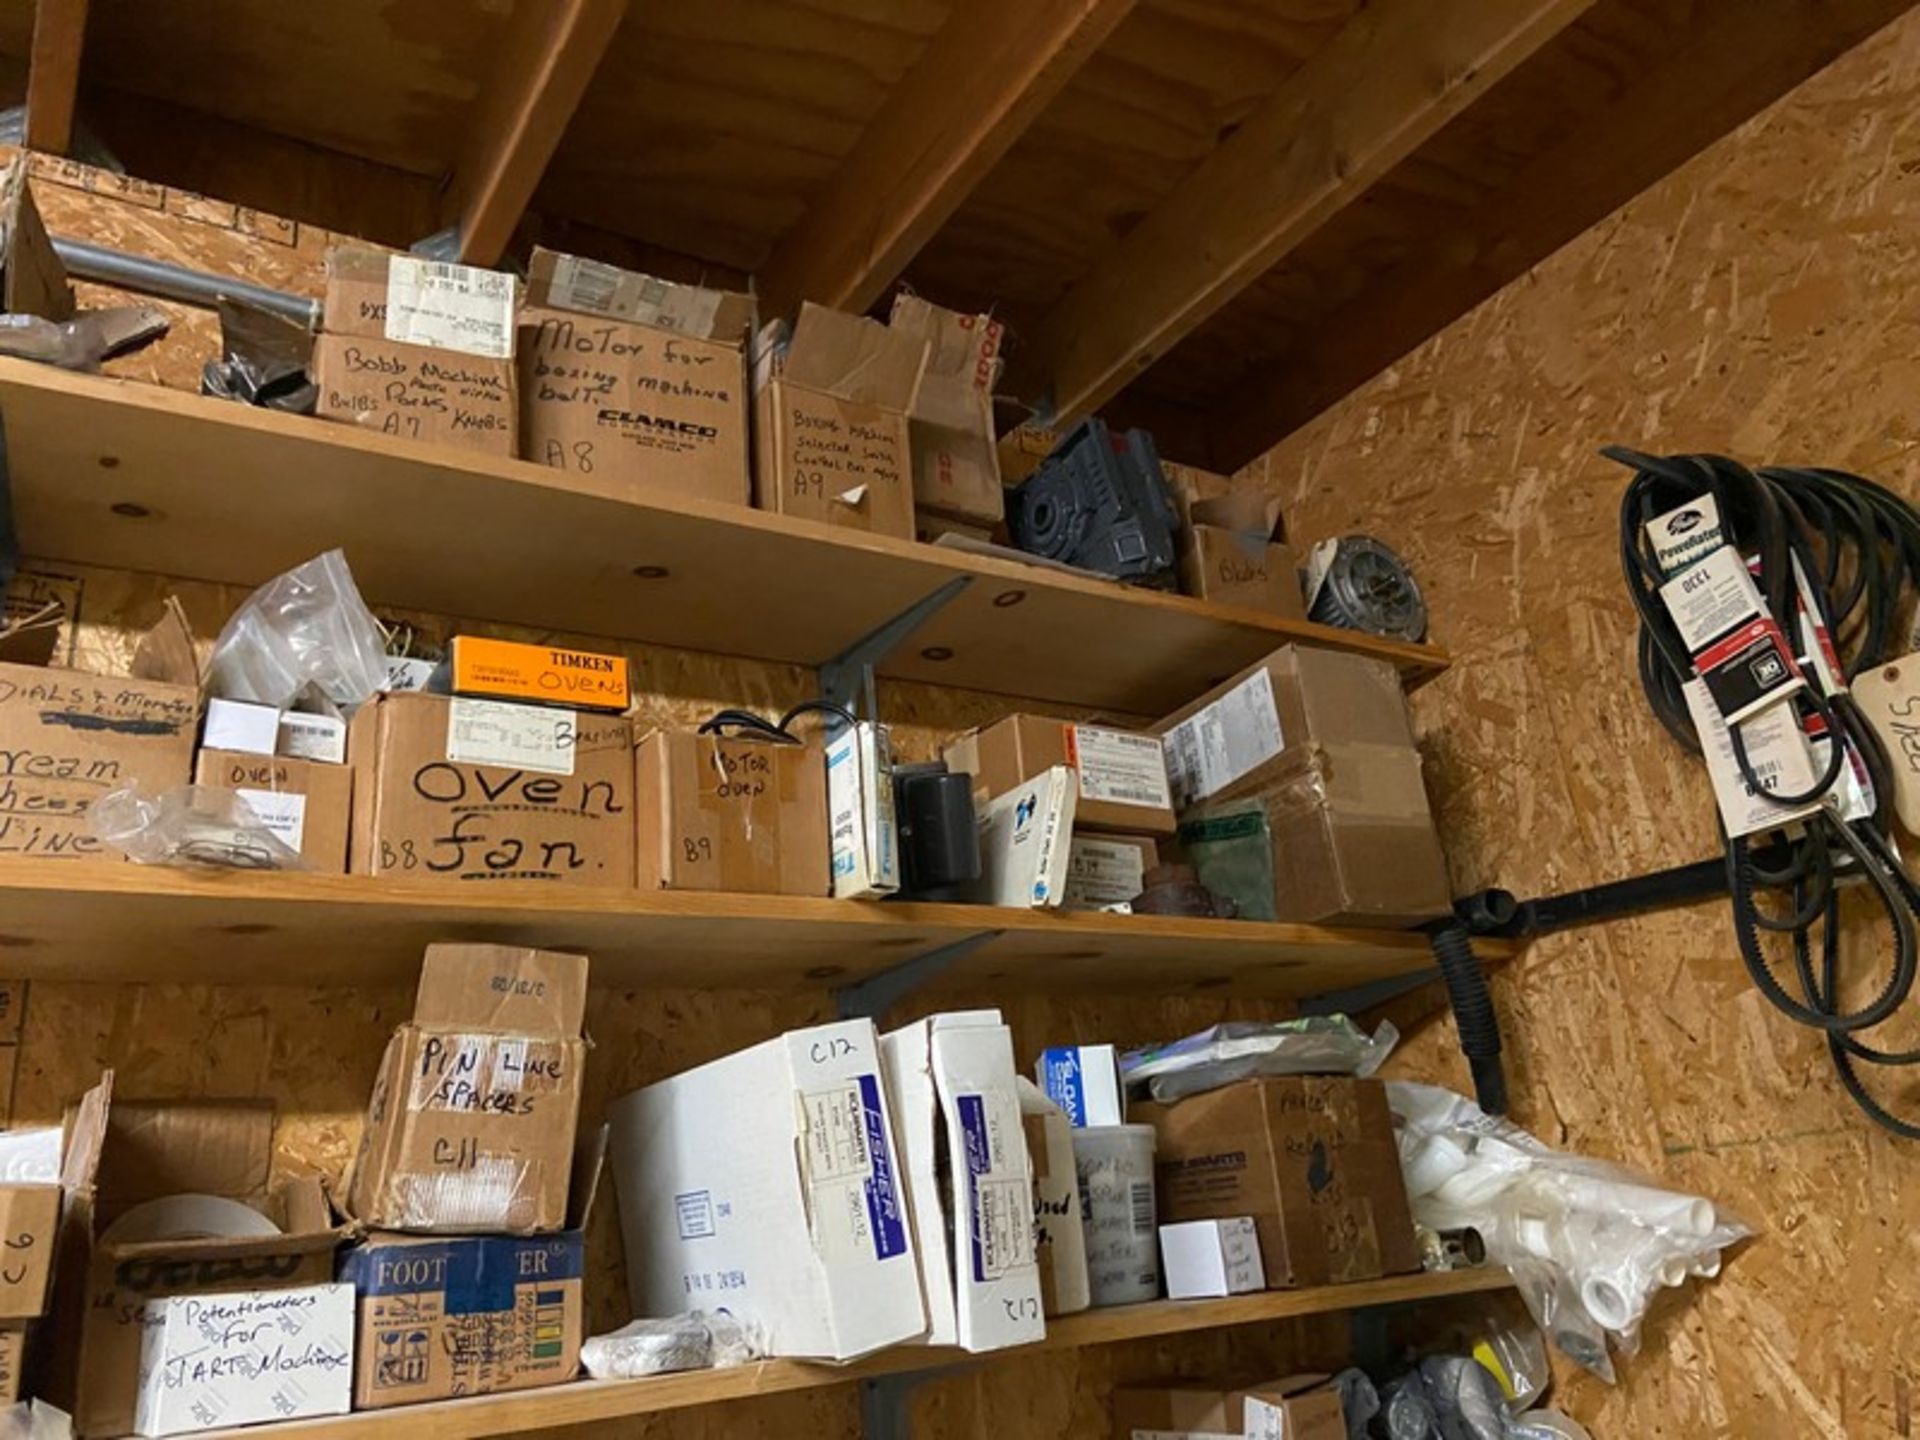 6-SHELVES OF CONTENTS, INCLUDES MOTORS, CASTERS, FUSES, SPARE LIGHTS, ELECTRICAL, & OTHER PRESENT - Image 8 of 8